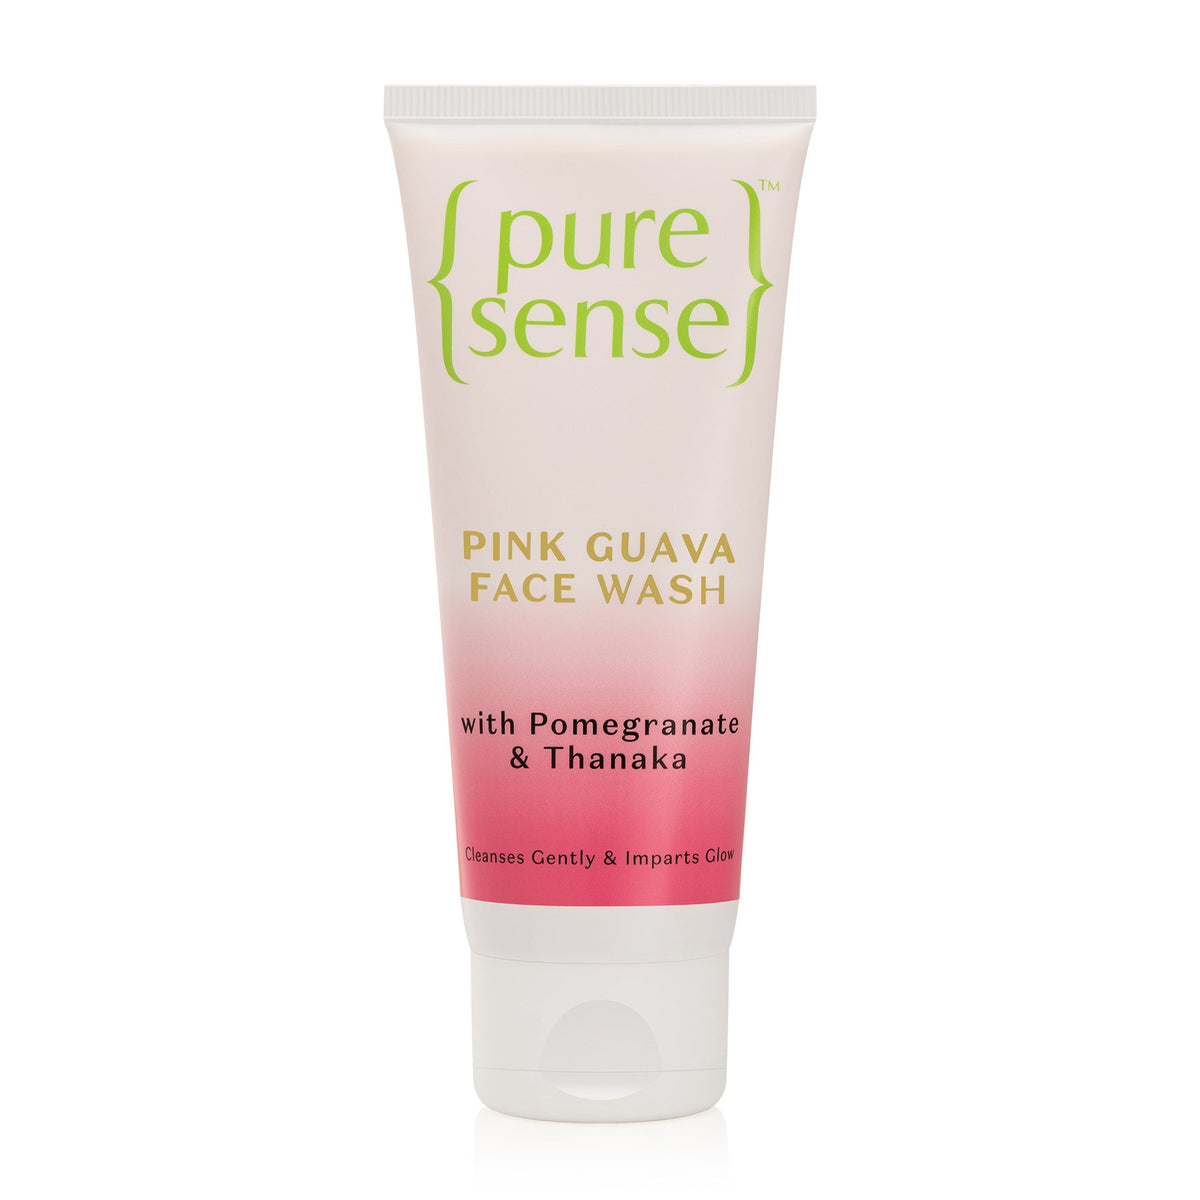 [CRED] Pink Guava Face Wash | From the makers of Parachute Advansed | 100ml